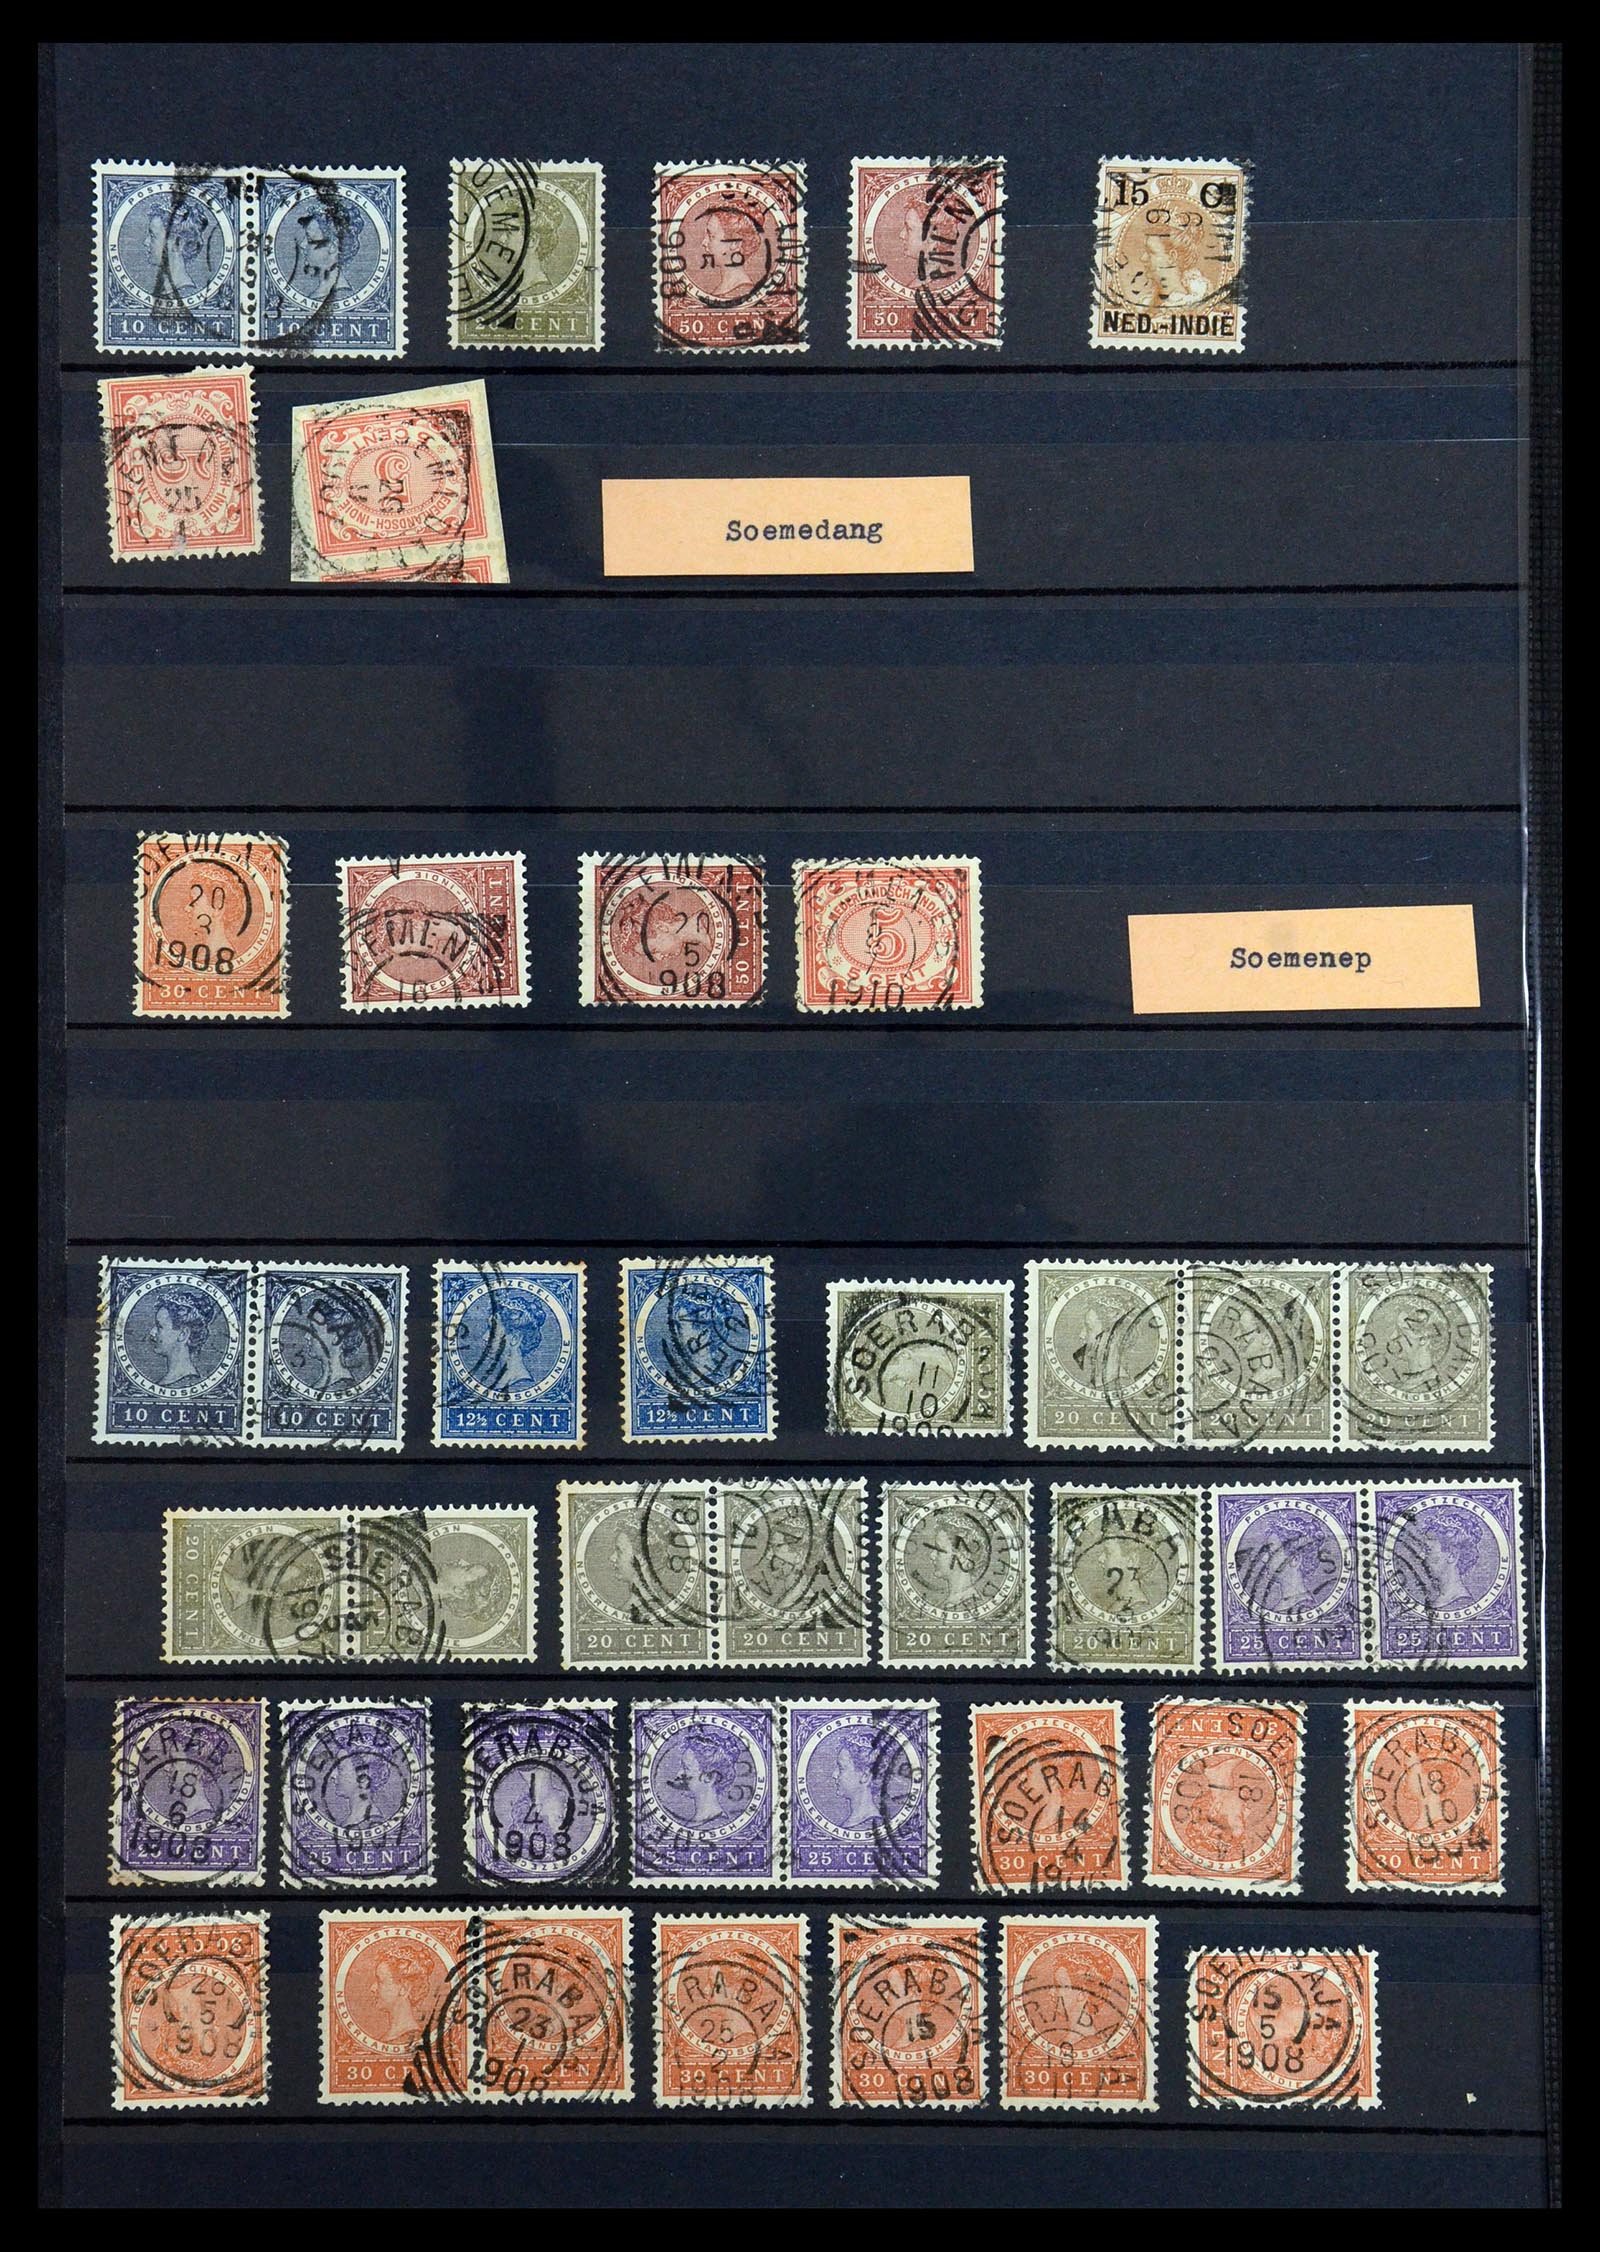 36371 048 - Stamp collection 36371 Dutch east Indies cancels.